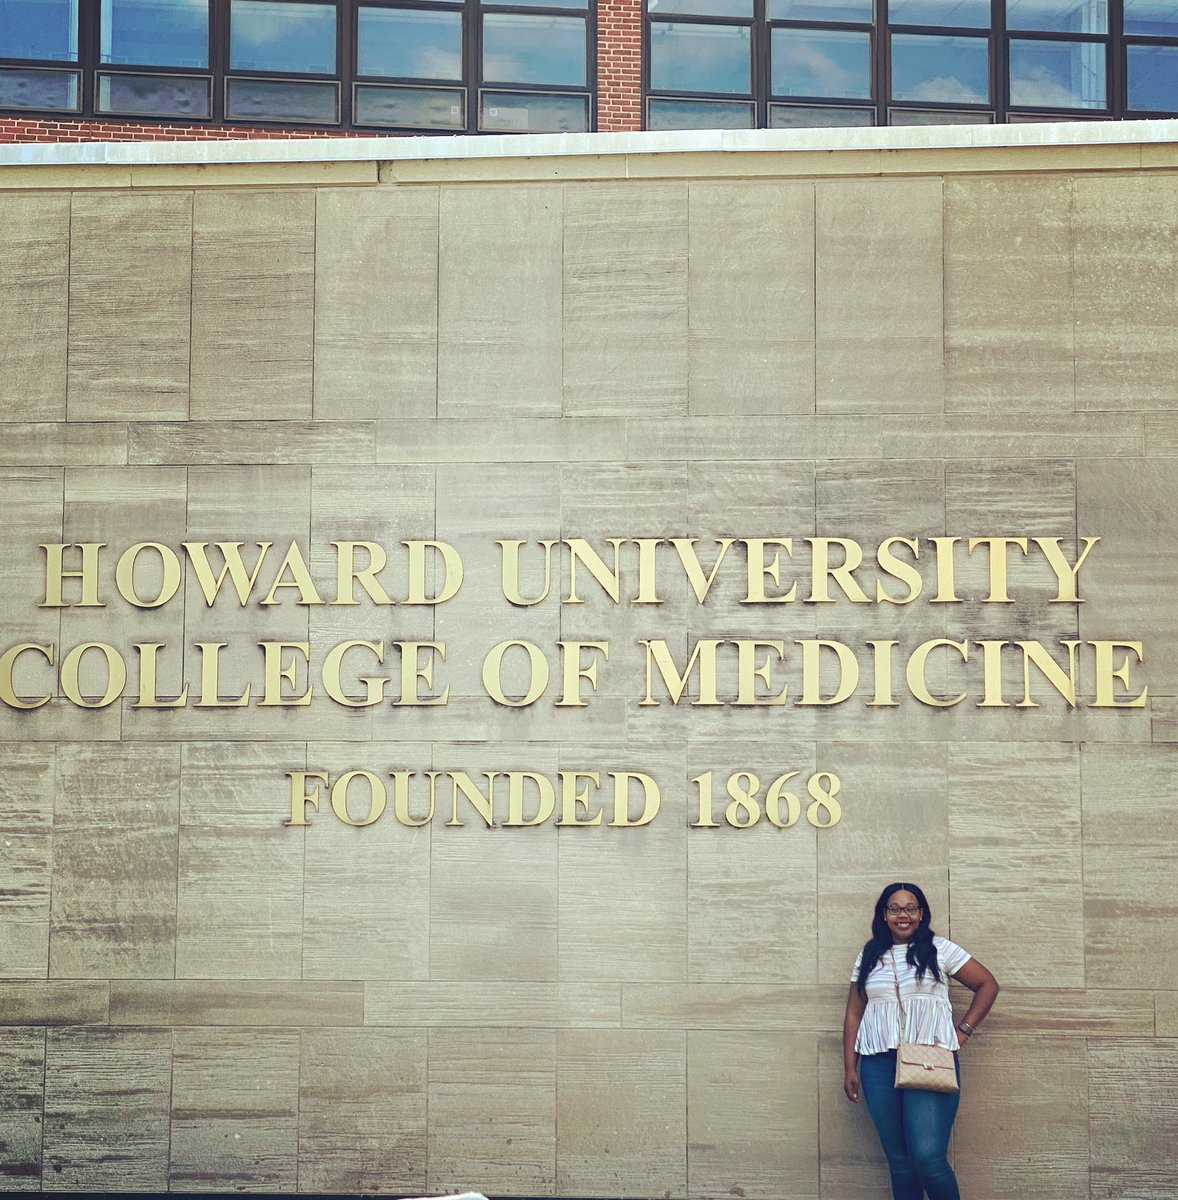 Three years ago I was touring Colleges and Universities, Three years later I am touring Medical Schools to find my next home to become an OB/GYN ✨ #dreamstoreality #blackgirlwhitecoat